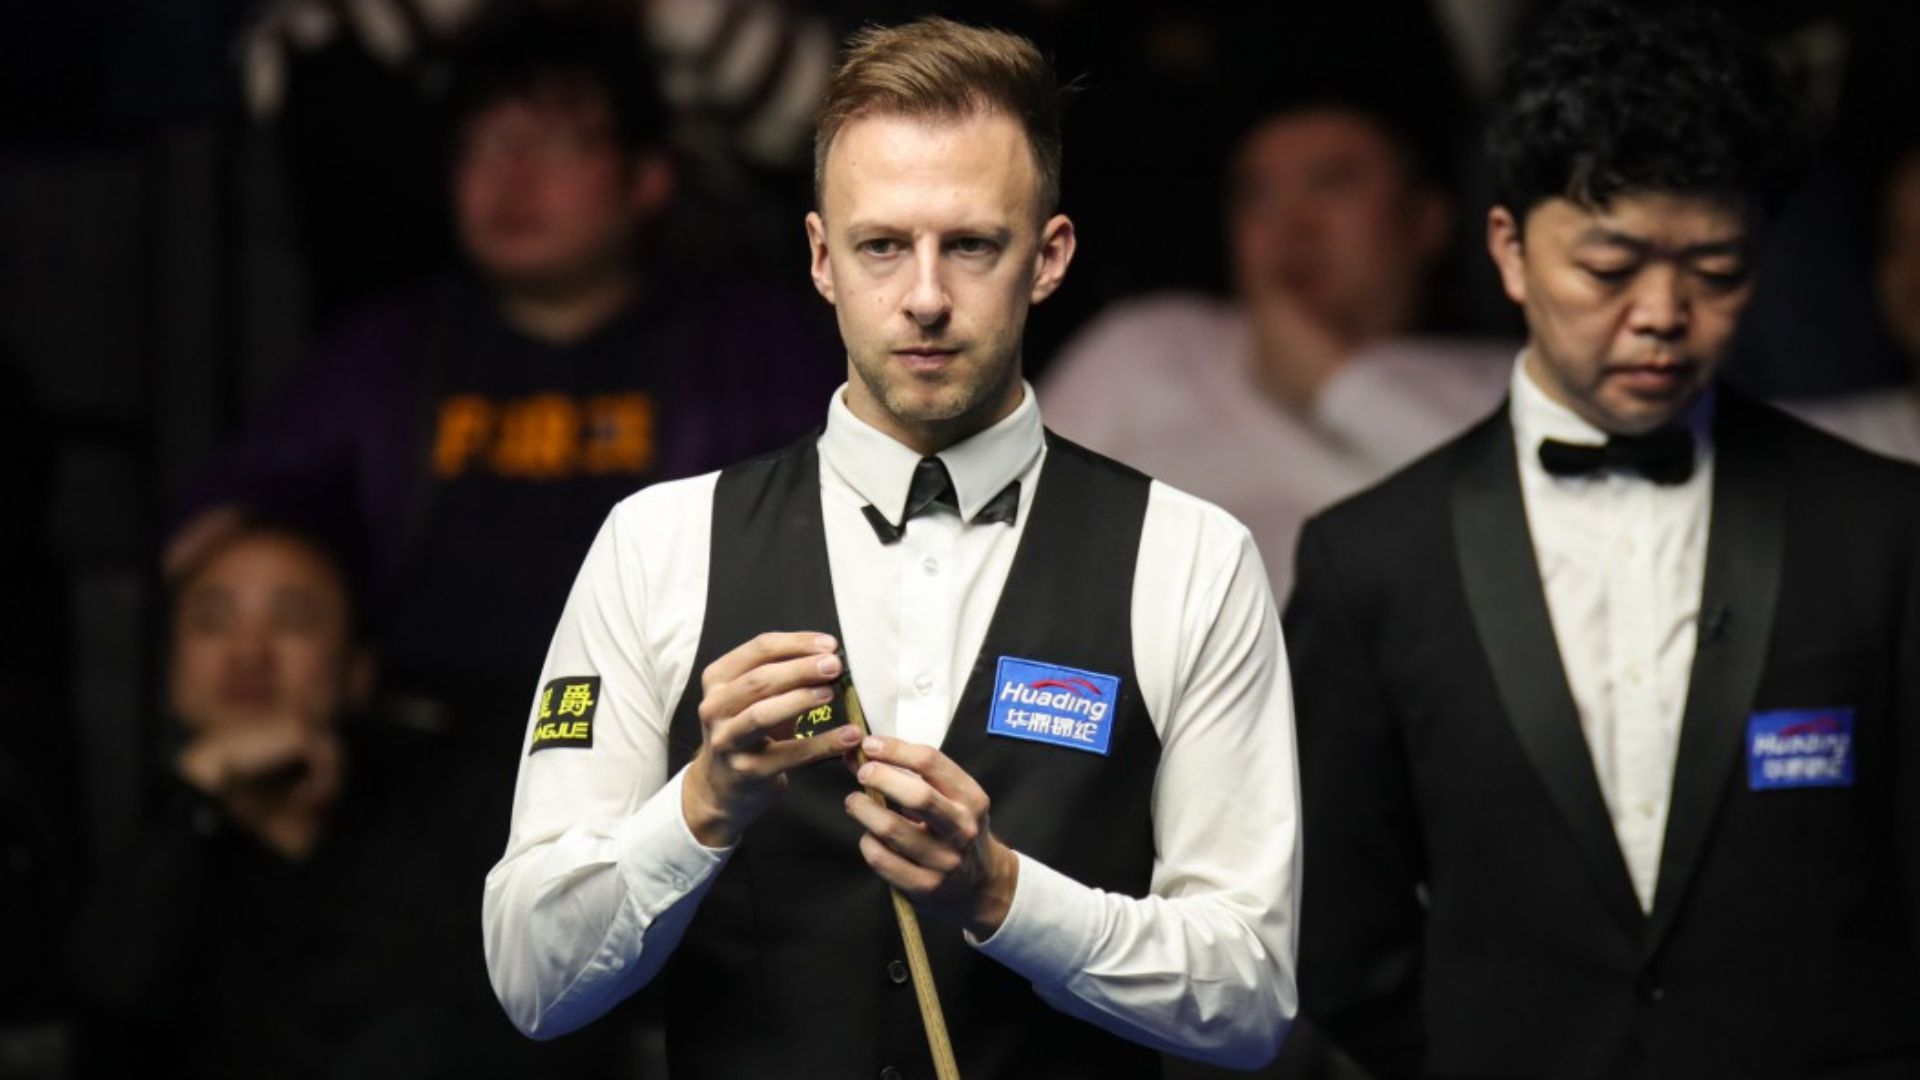 Watch LIVE as Judd Trump battles Jackson Page in World Open Snooker semi-final showdown – Ding vs Robertson up next! Stay tuned for latest updates.